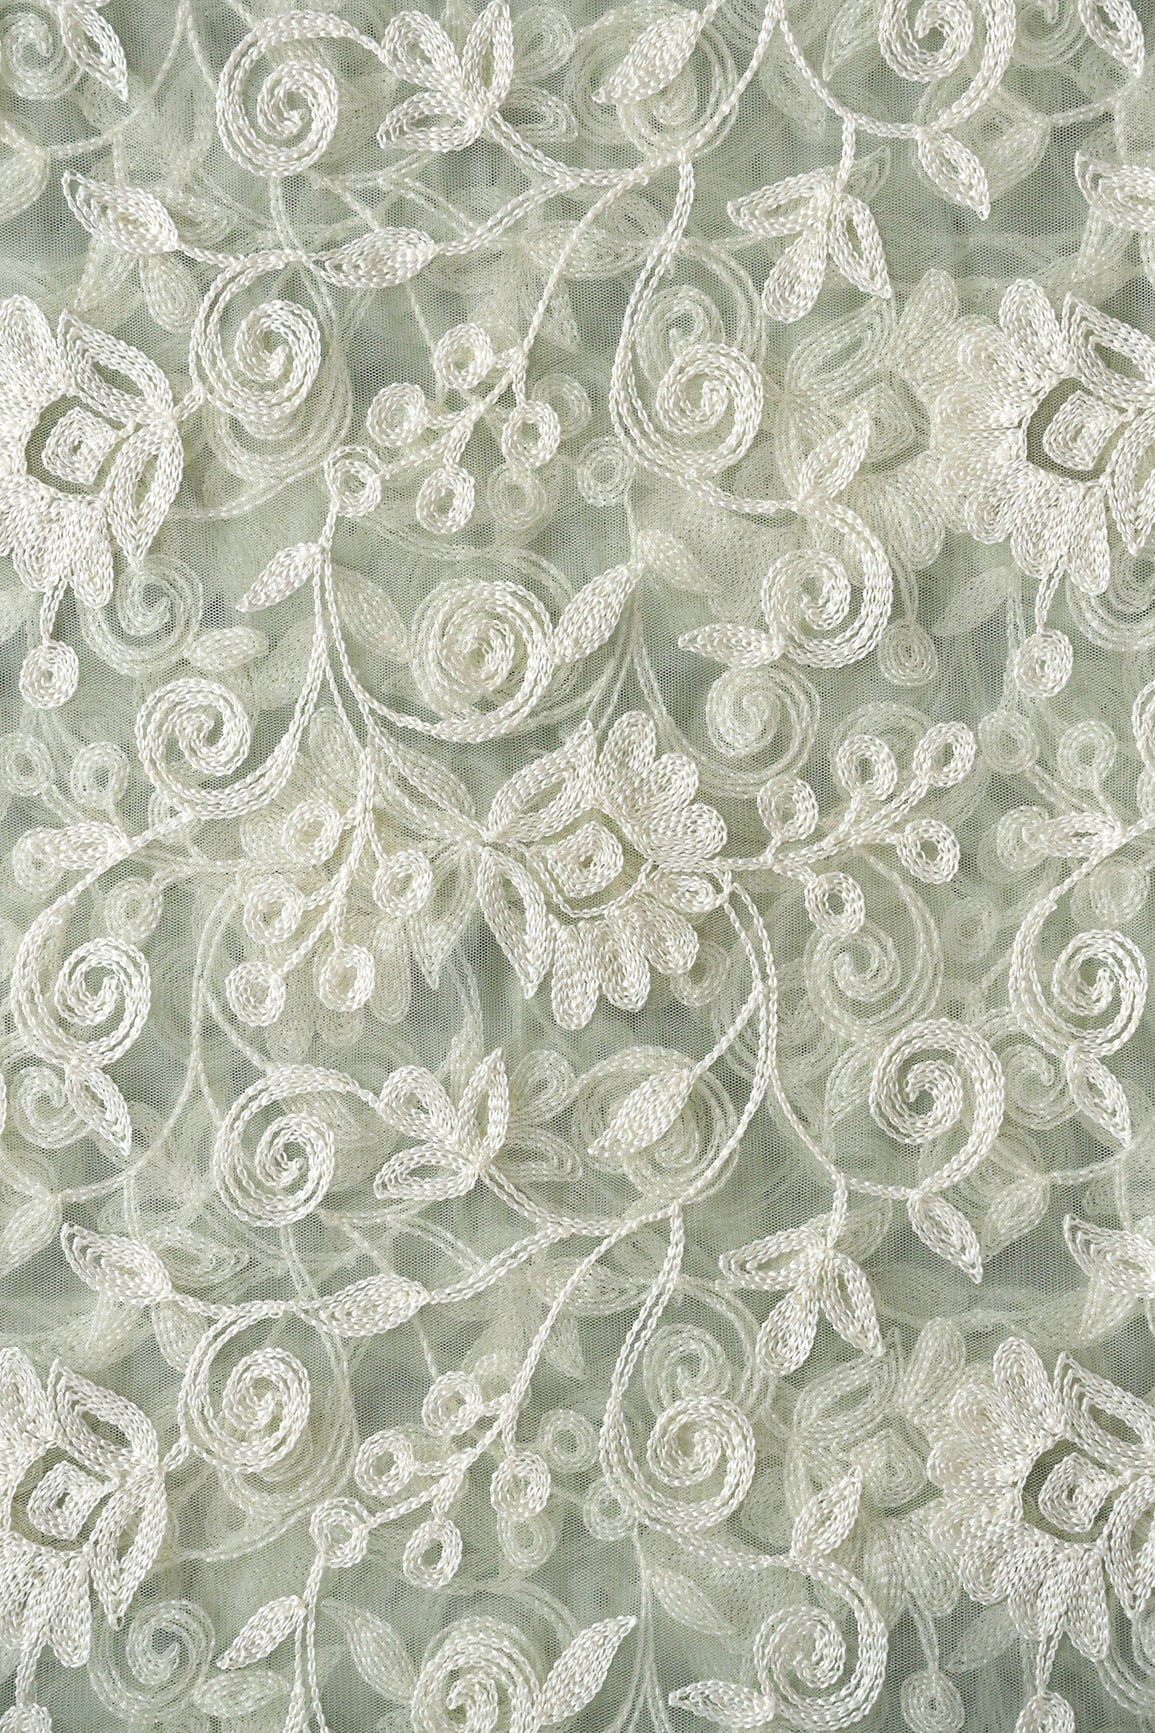 doeraa Embroidery Fabrics White Thread Beautiful Heavy Floral Embroidery On Dusty Olive Soft Net Fabric